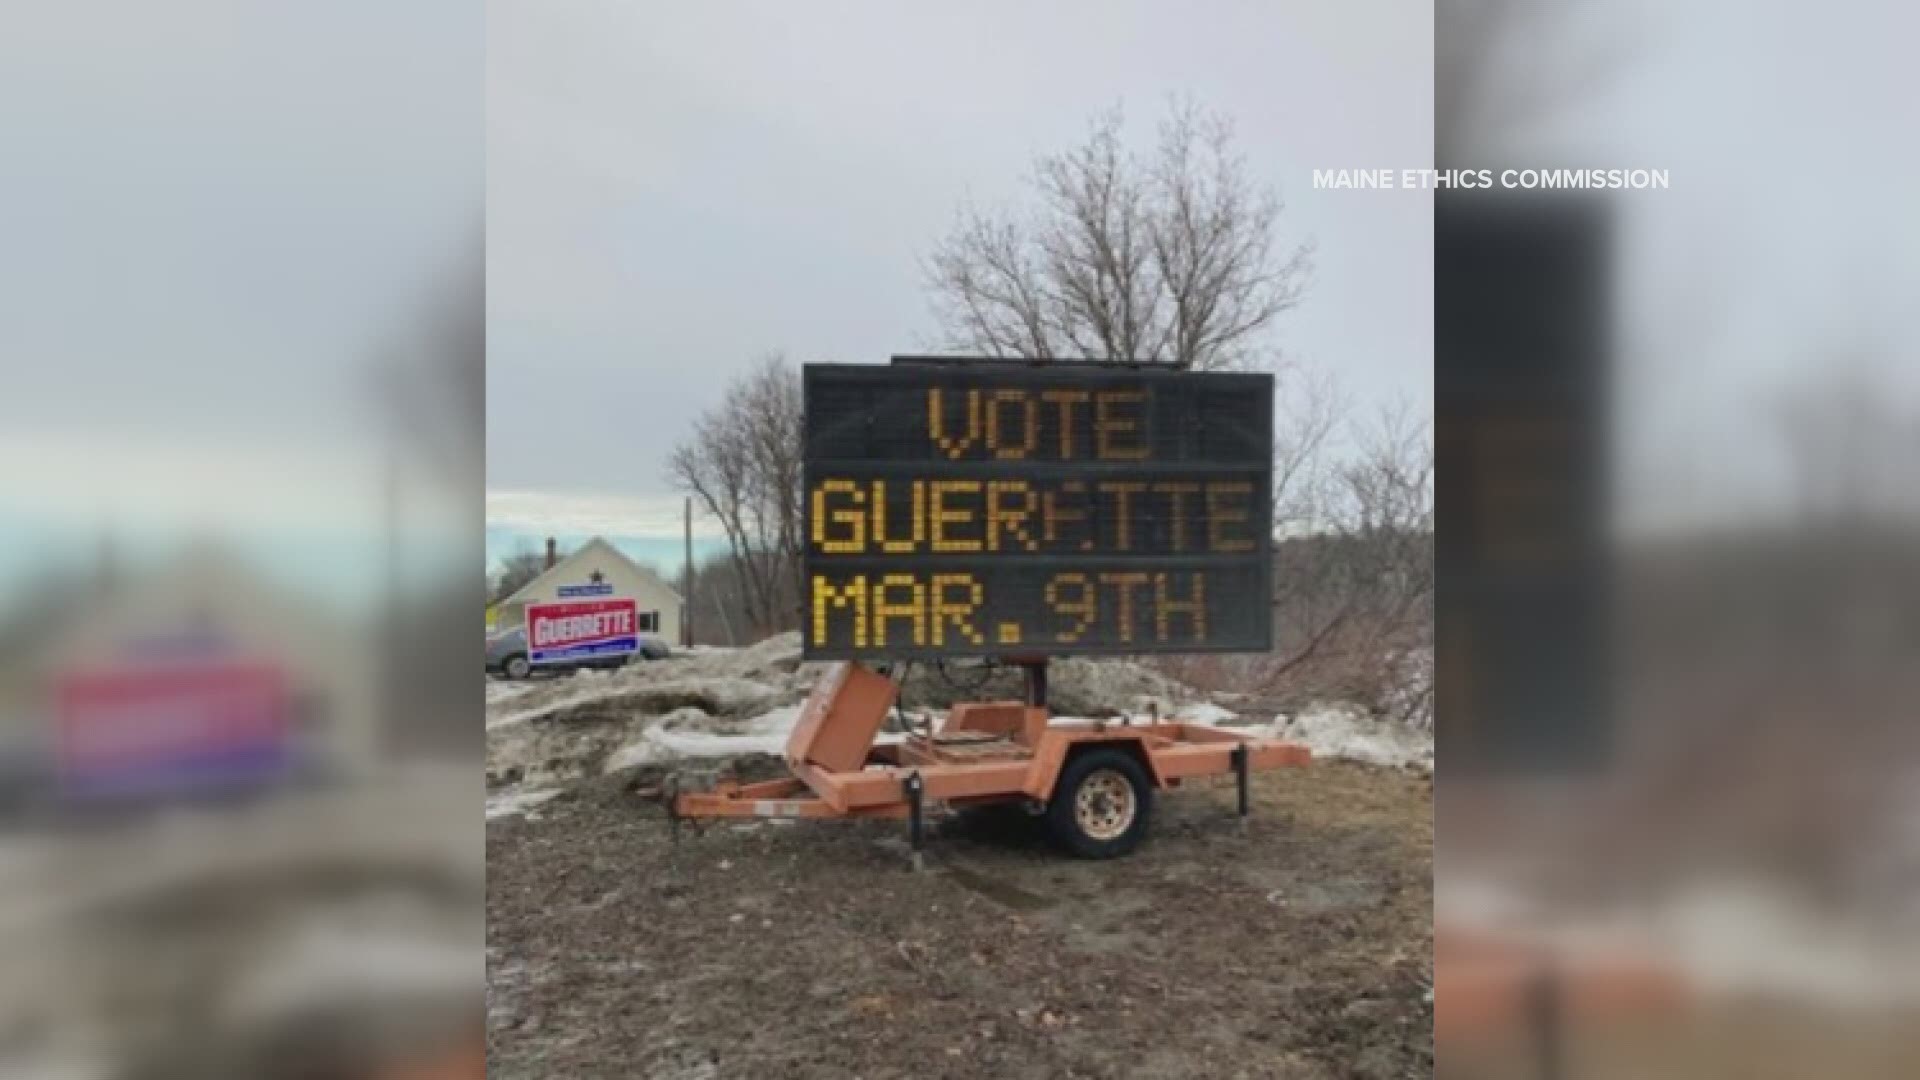 Willian Guerrette is running to fill the vacant District 14 seat and used four solar-powered road signed to urge voters to vote for him which violated campaign rules